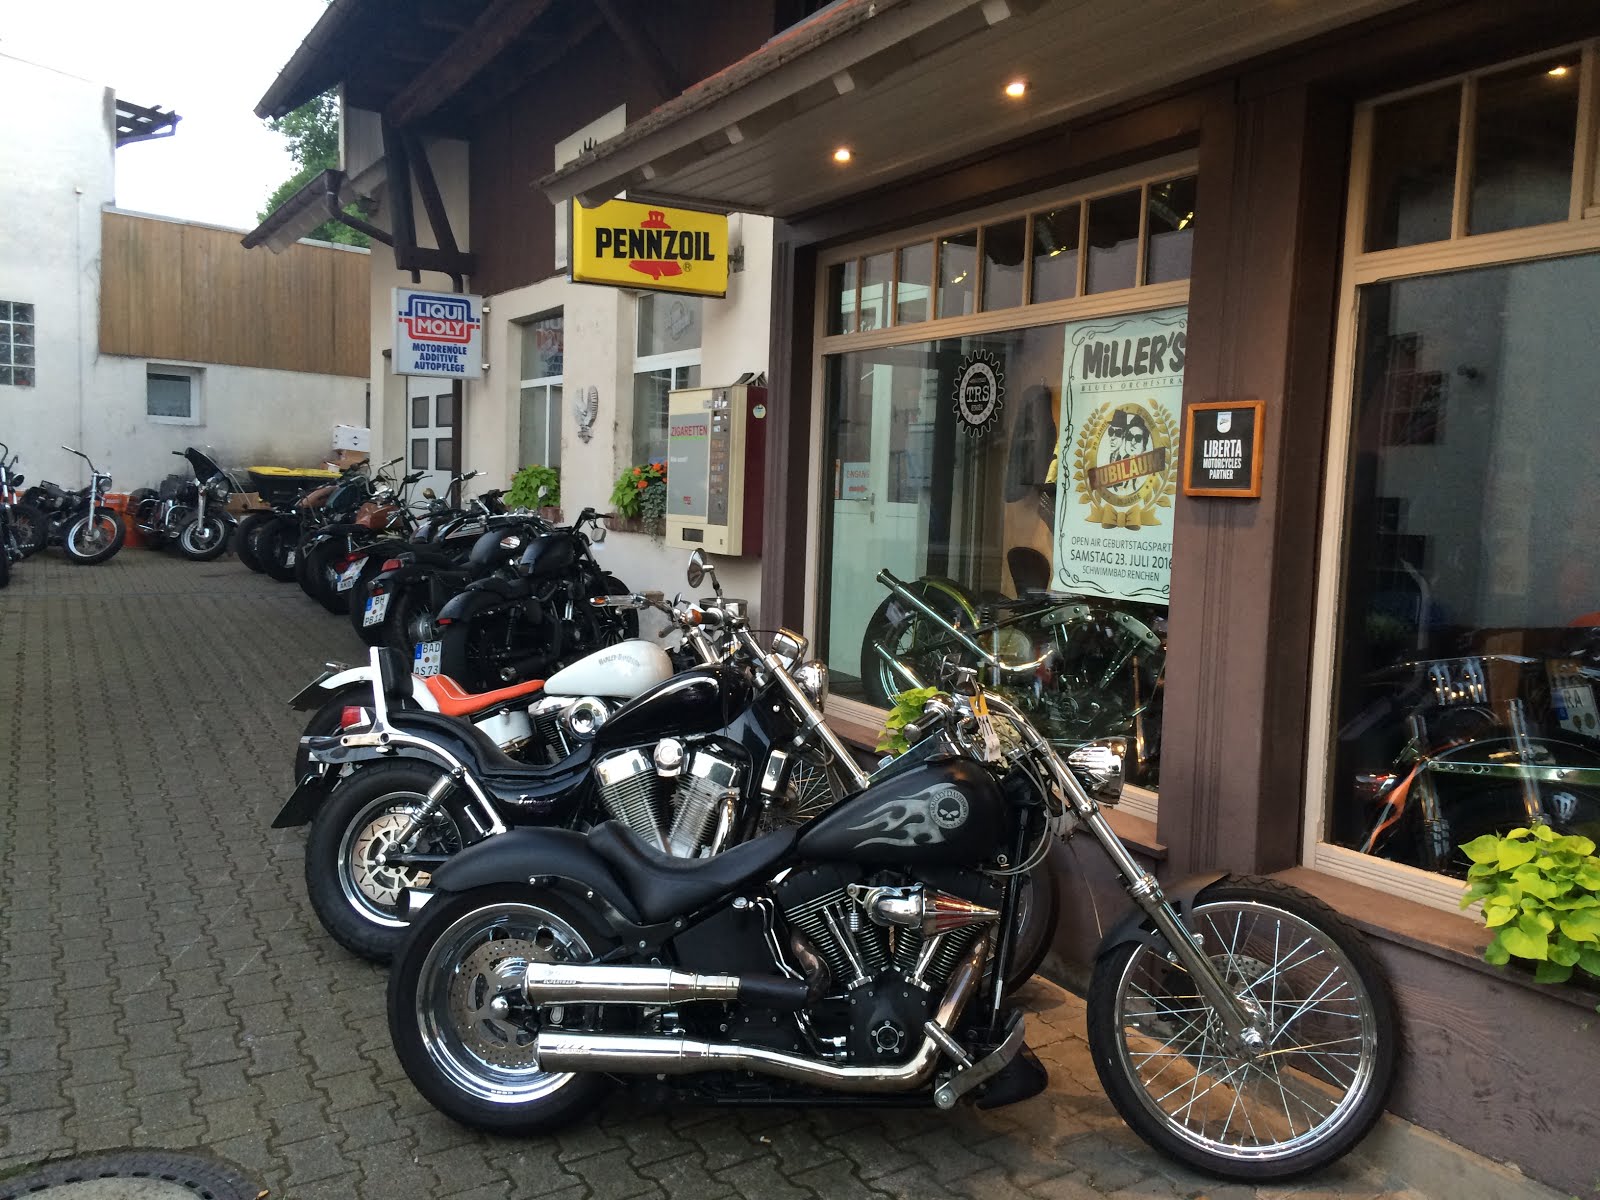 Harley dealer in town kept all out over night